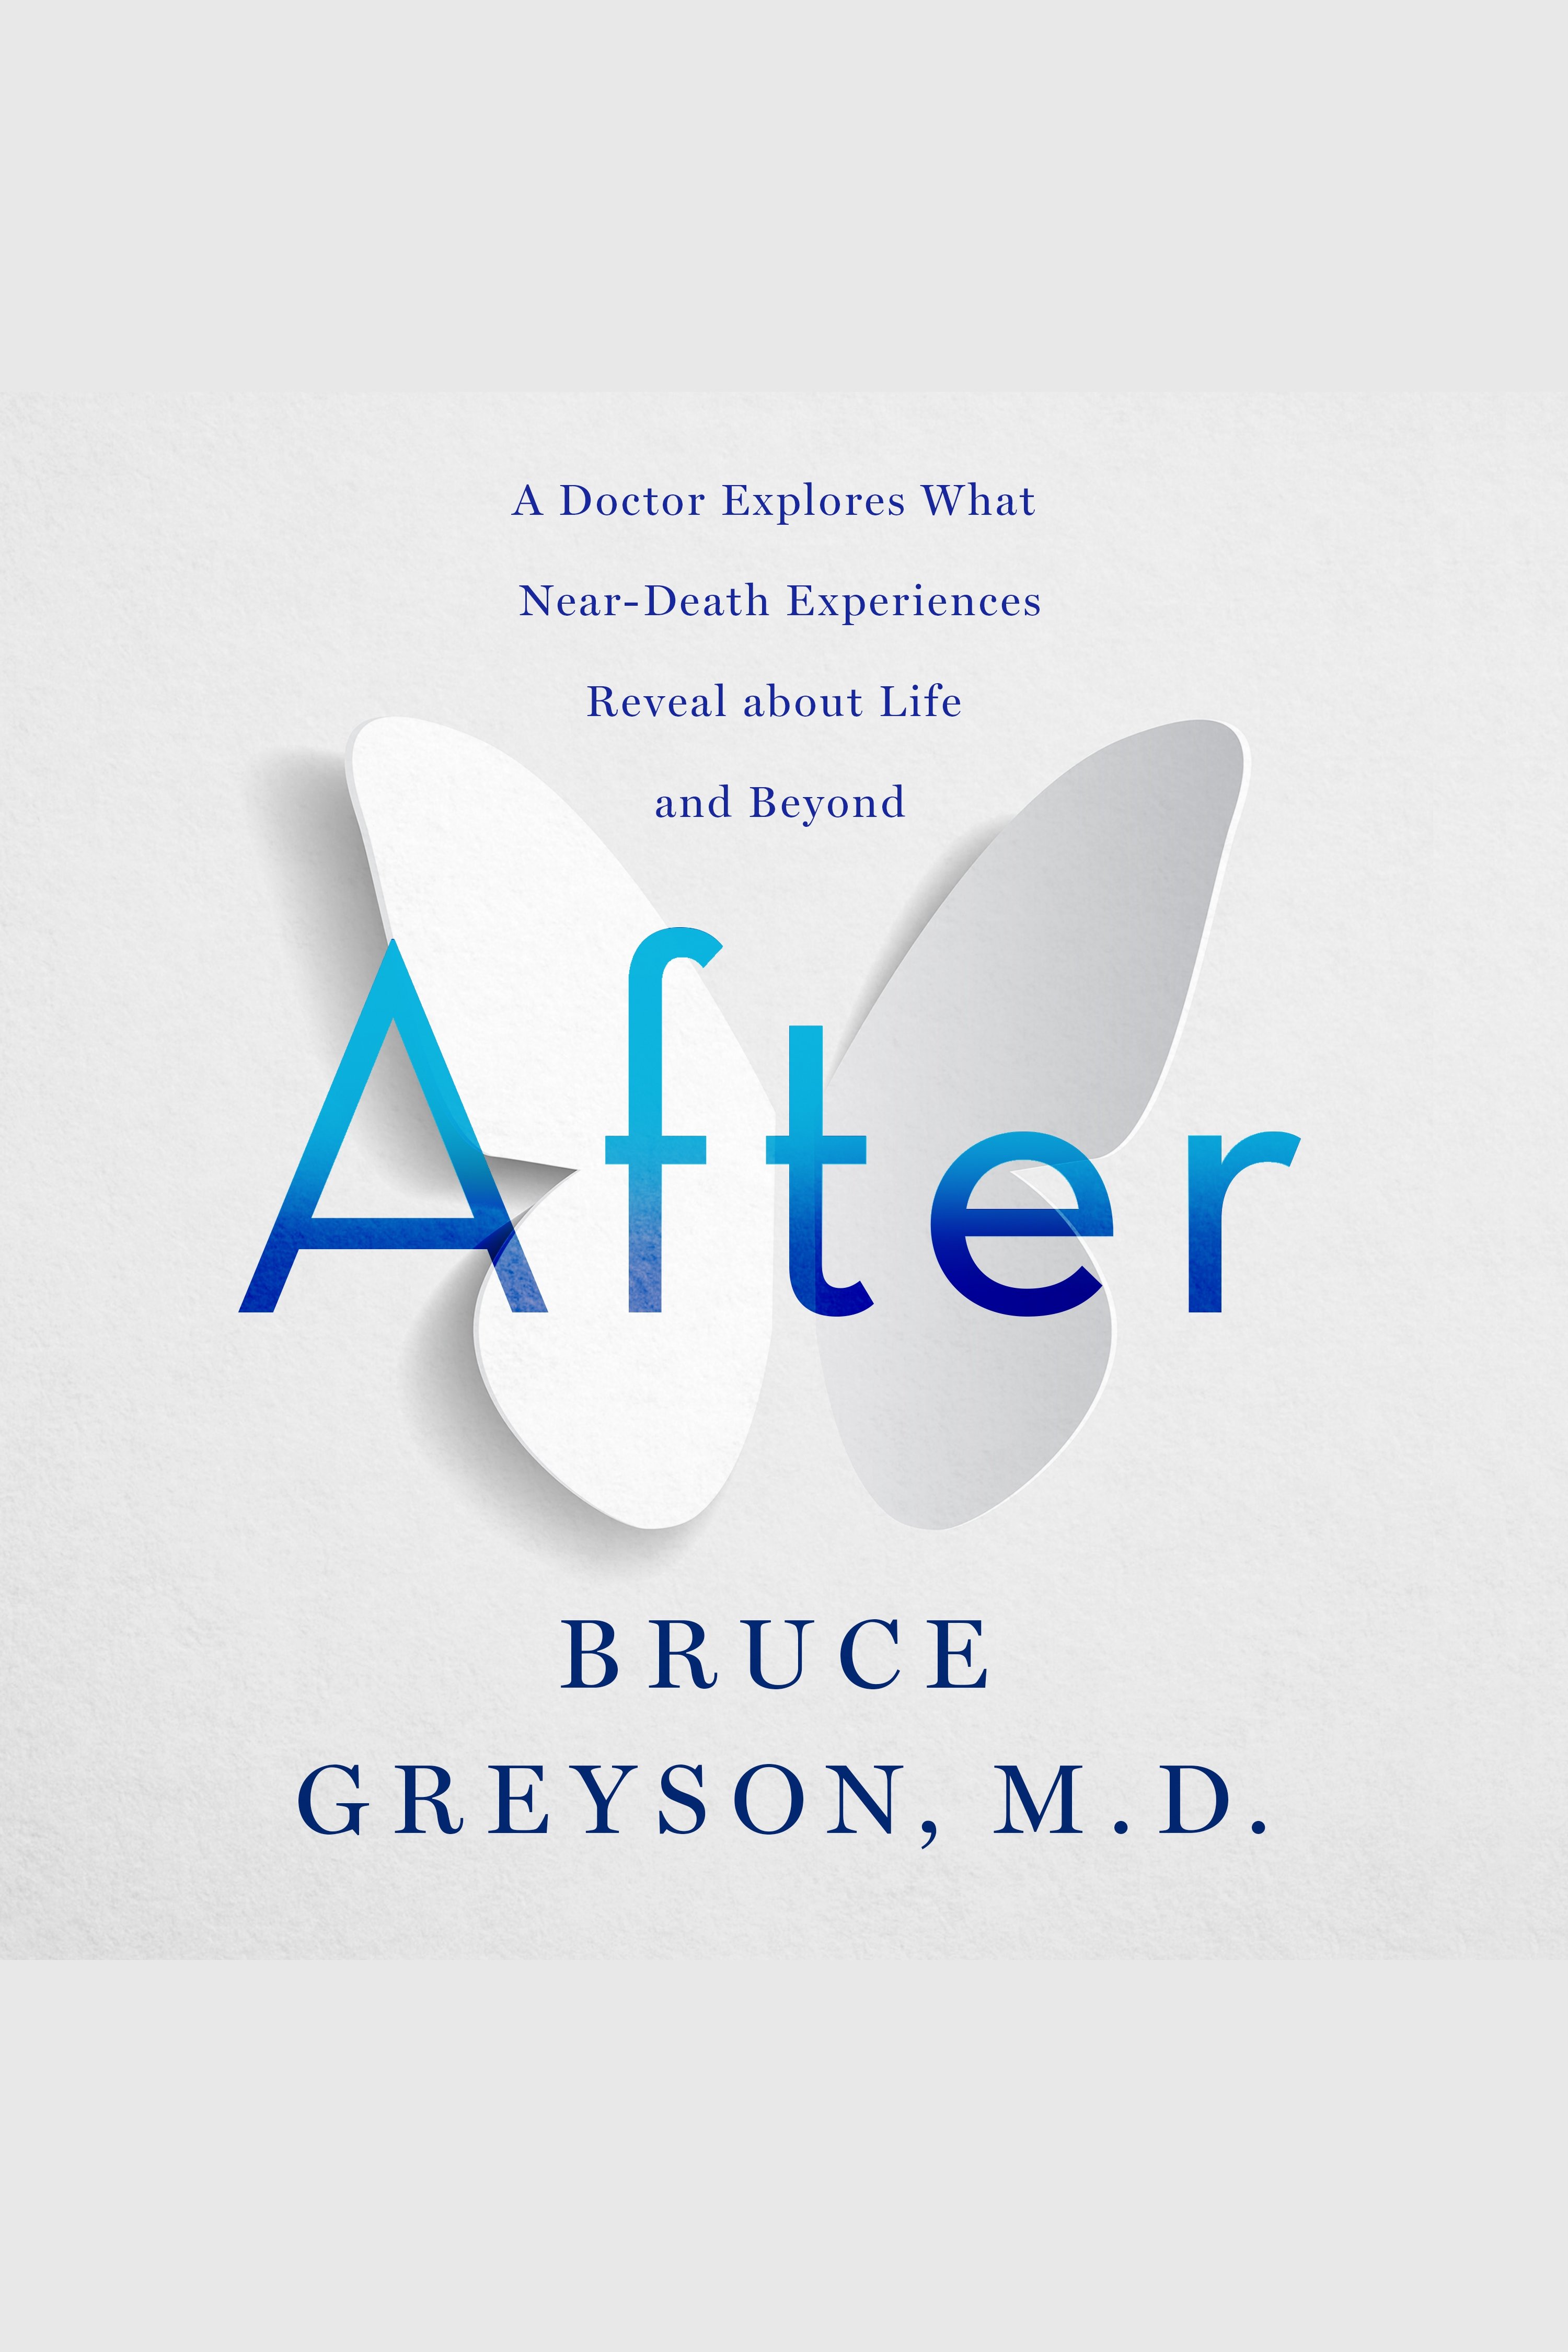 After A Doctor Explores What Near-Death Experiences Reveal about Life and Beyond cover image